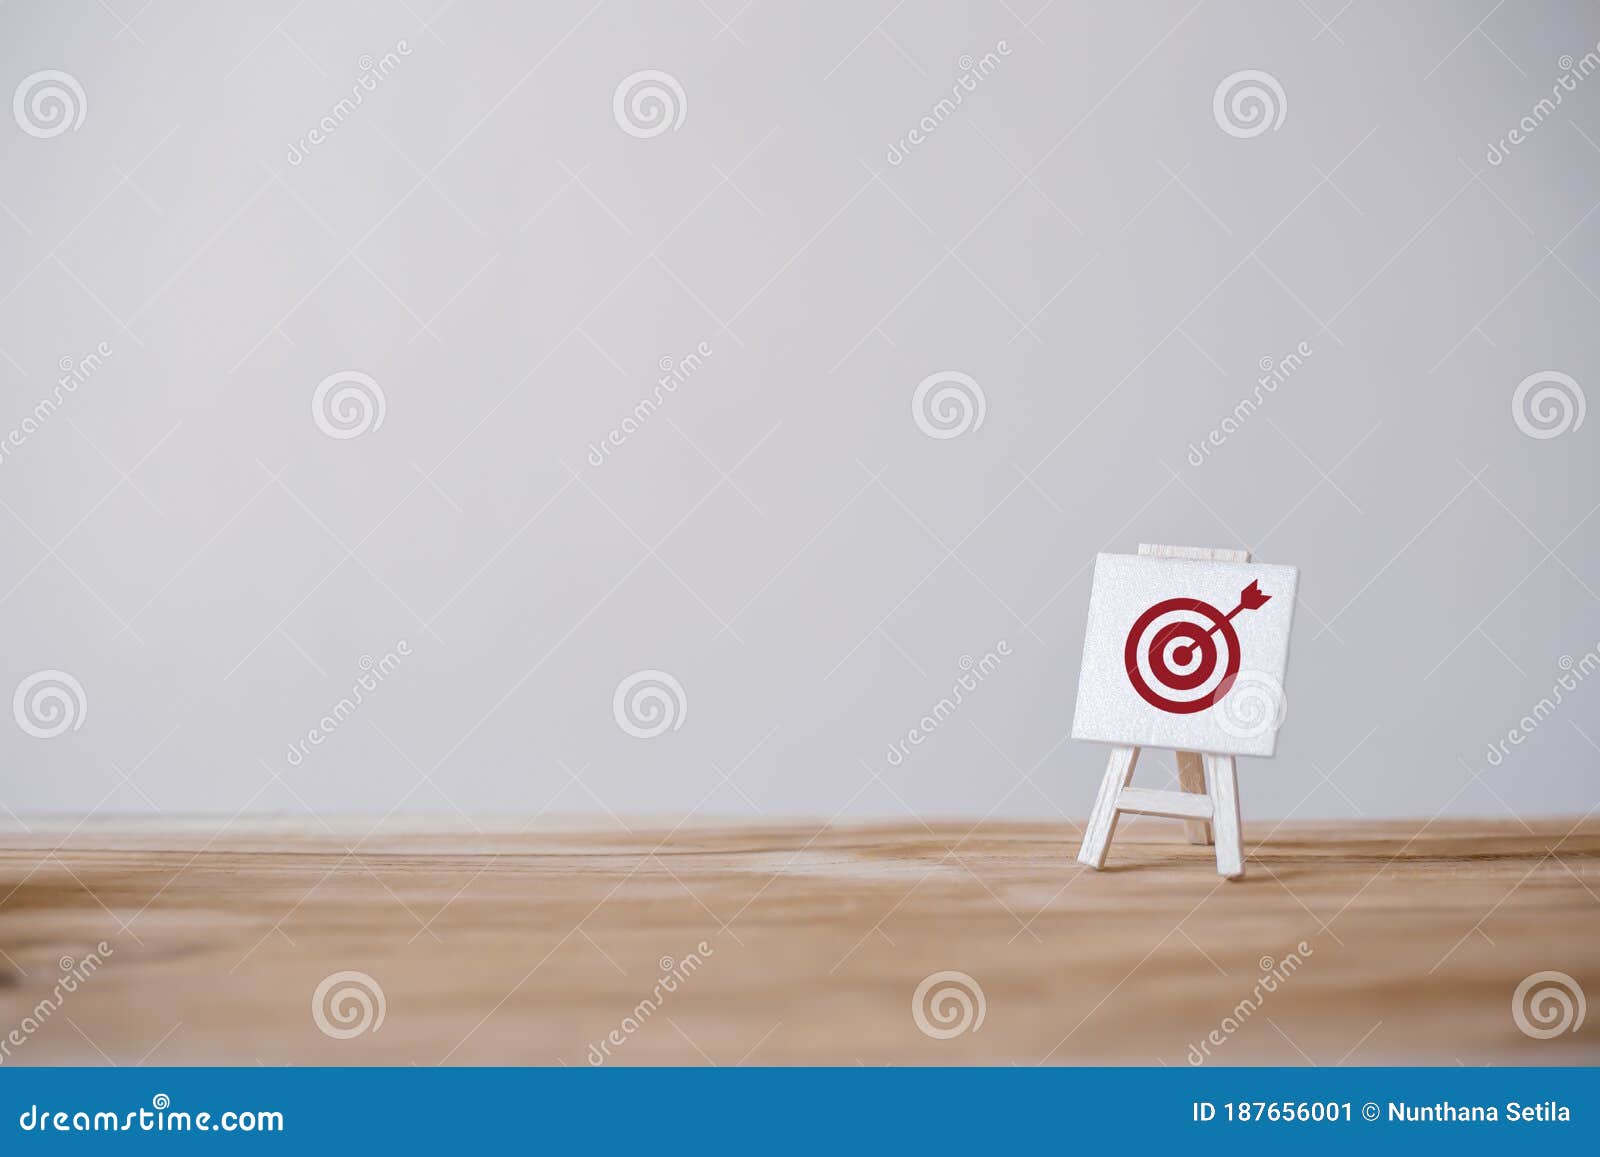 sign stand with an arrow in the target.tactics of advertising targeting. advertise campaigns. goal achievement and purposefulness